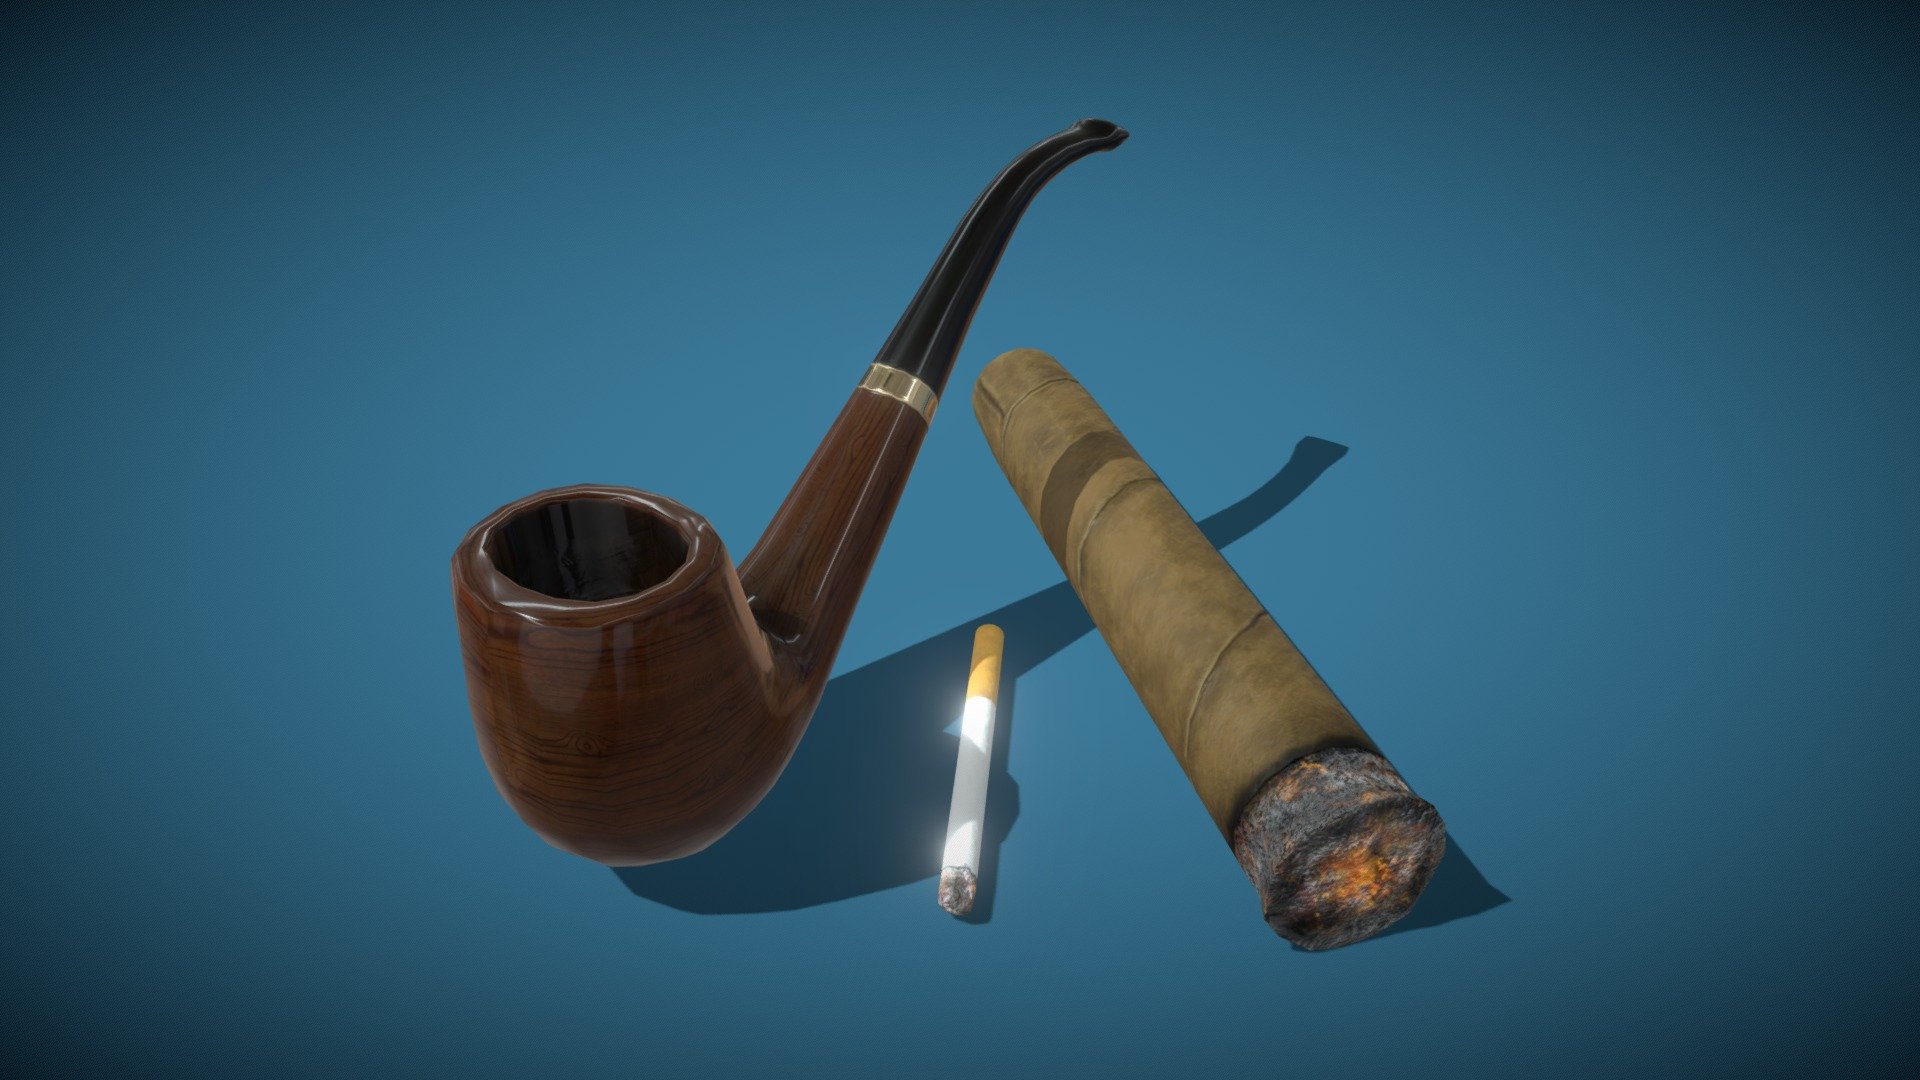 Custom-Order from ATLAS Server AquariusRP



In addition to alcohol and beautiful women, a pirate's greatest vice is the consumption of tobacco products.



Set includes: Cigar, Cigarette &amp; Tobacco-Pipe

2K Textures (2048x2048)



LowPoly-Assets for Video &amp;/or Games



Made with: 3Ds Max, zBrush, Substance Painter, Photoshop - [Set] Tobacco Accessoires - Buy Royalty Free 3D model by MDSDesign 3d model